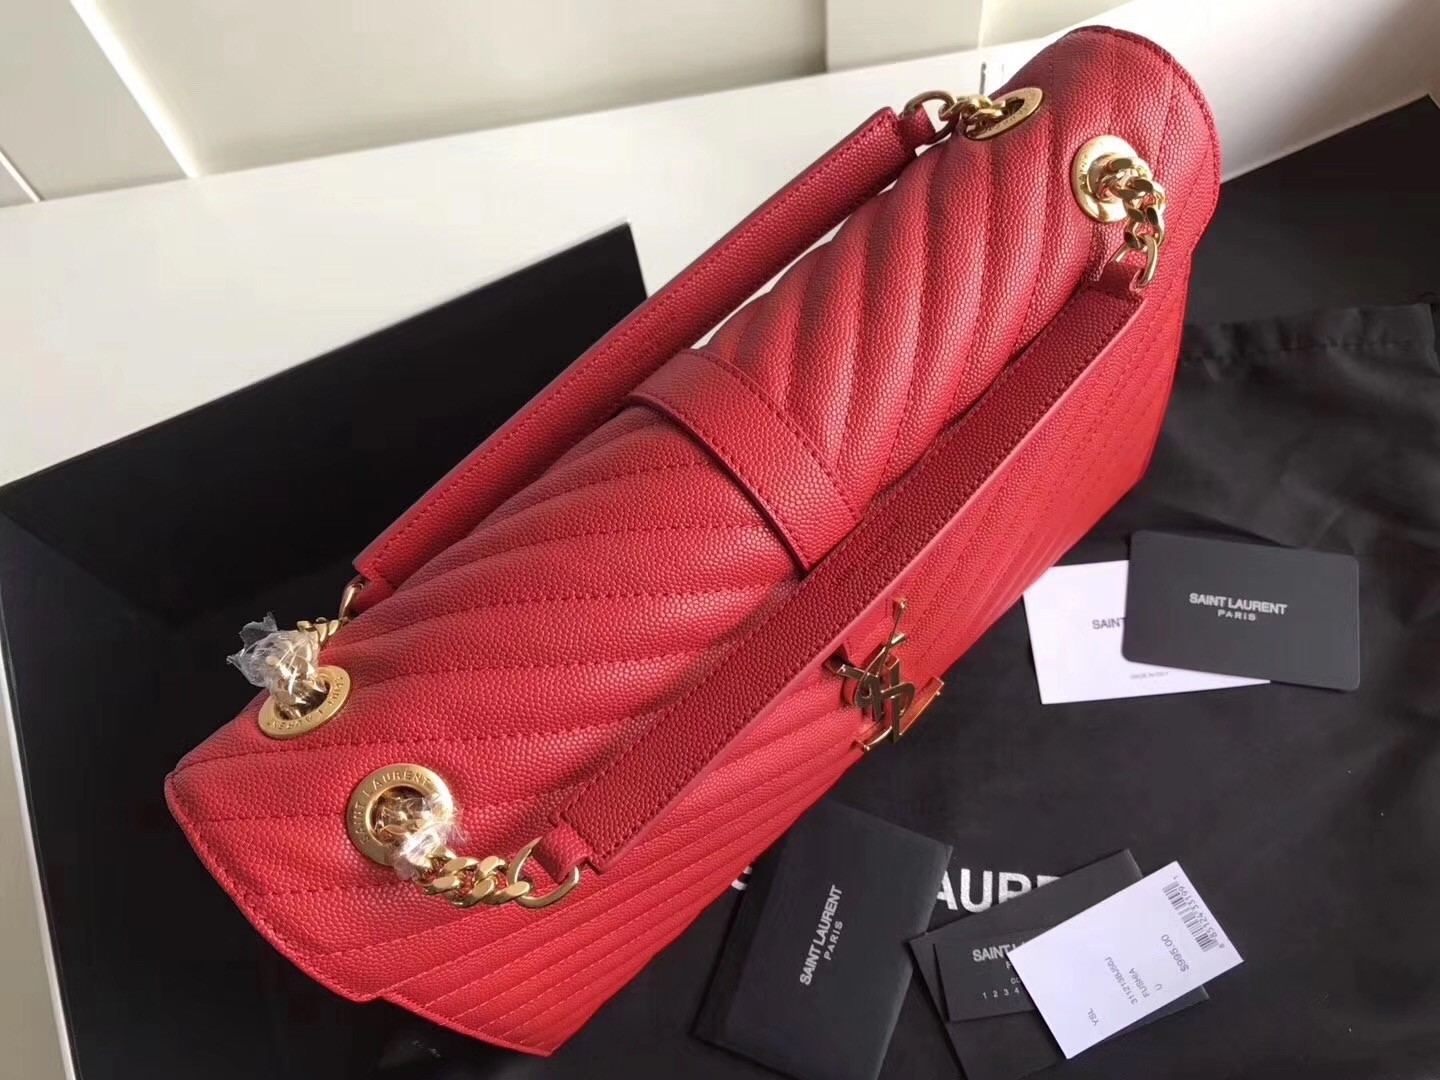 Saint Laurent Envelope Large Bag In Red Quilted Leather 586